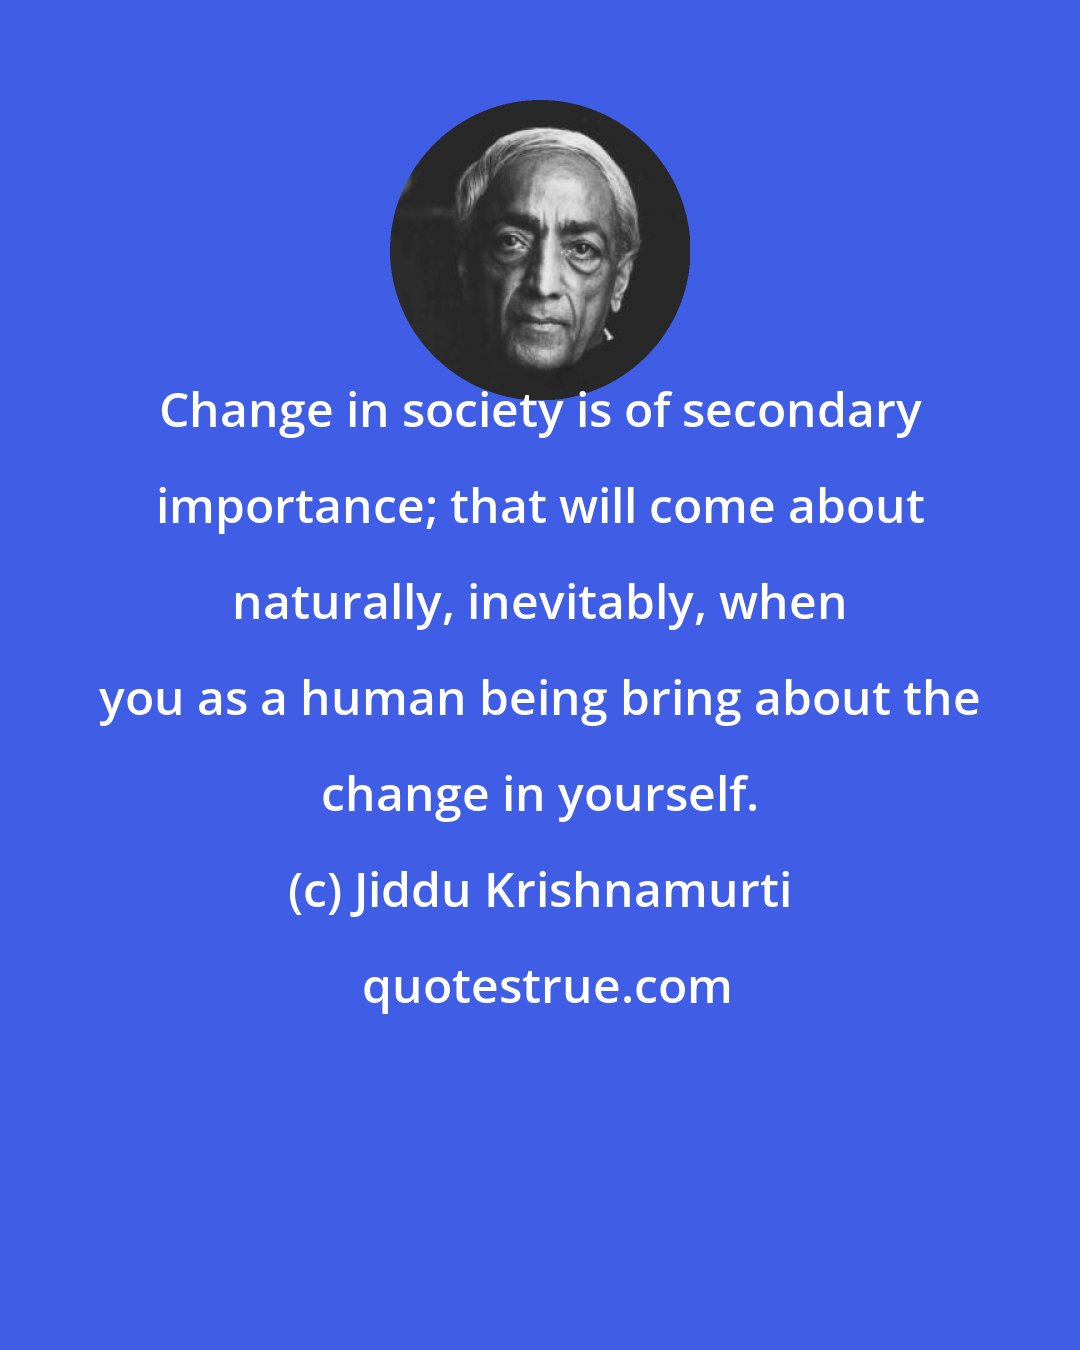 Jiddu Krishnamurti: Change in society is of secondary importance; that will come about naturally, inevitably, when you as a human being bring about the change in yourself.